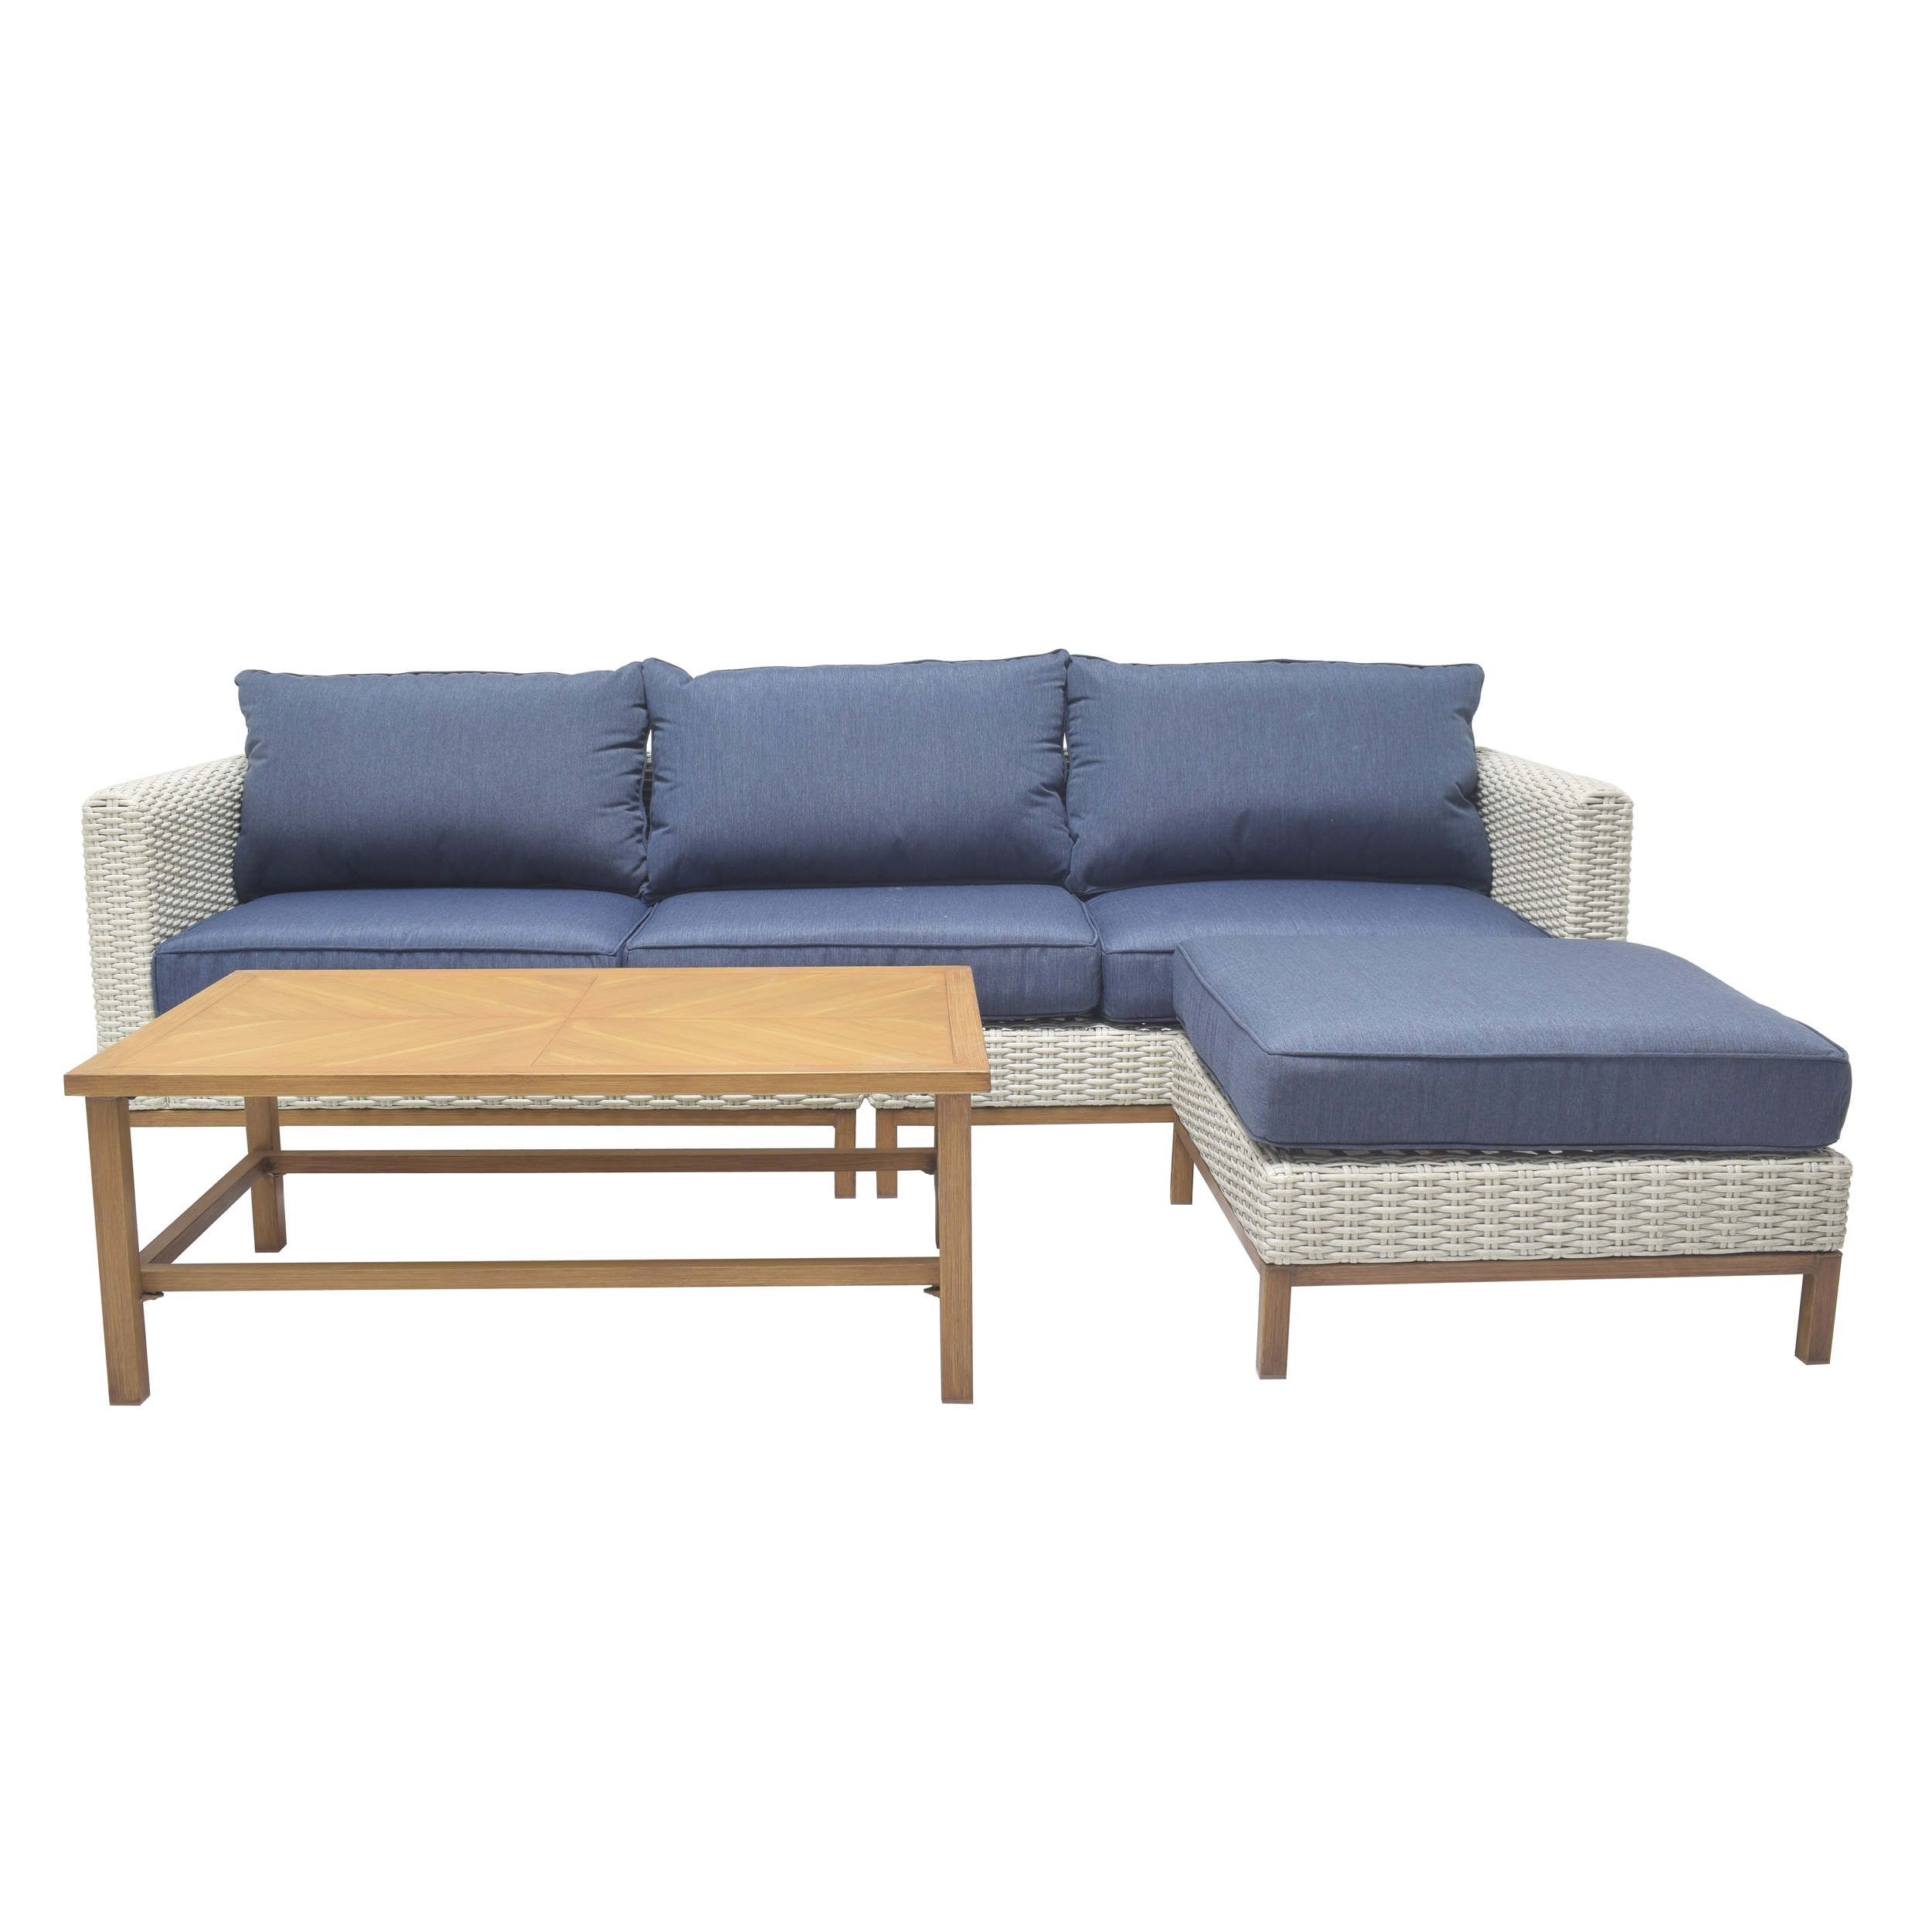 Veda Springs 4-Piece Woven Patio Conversation Set with Blue Cushions | - Origin 21 LG-21169-4PCB